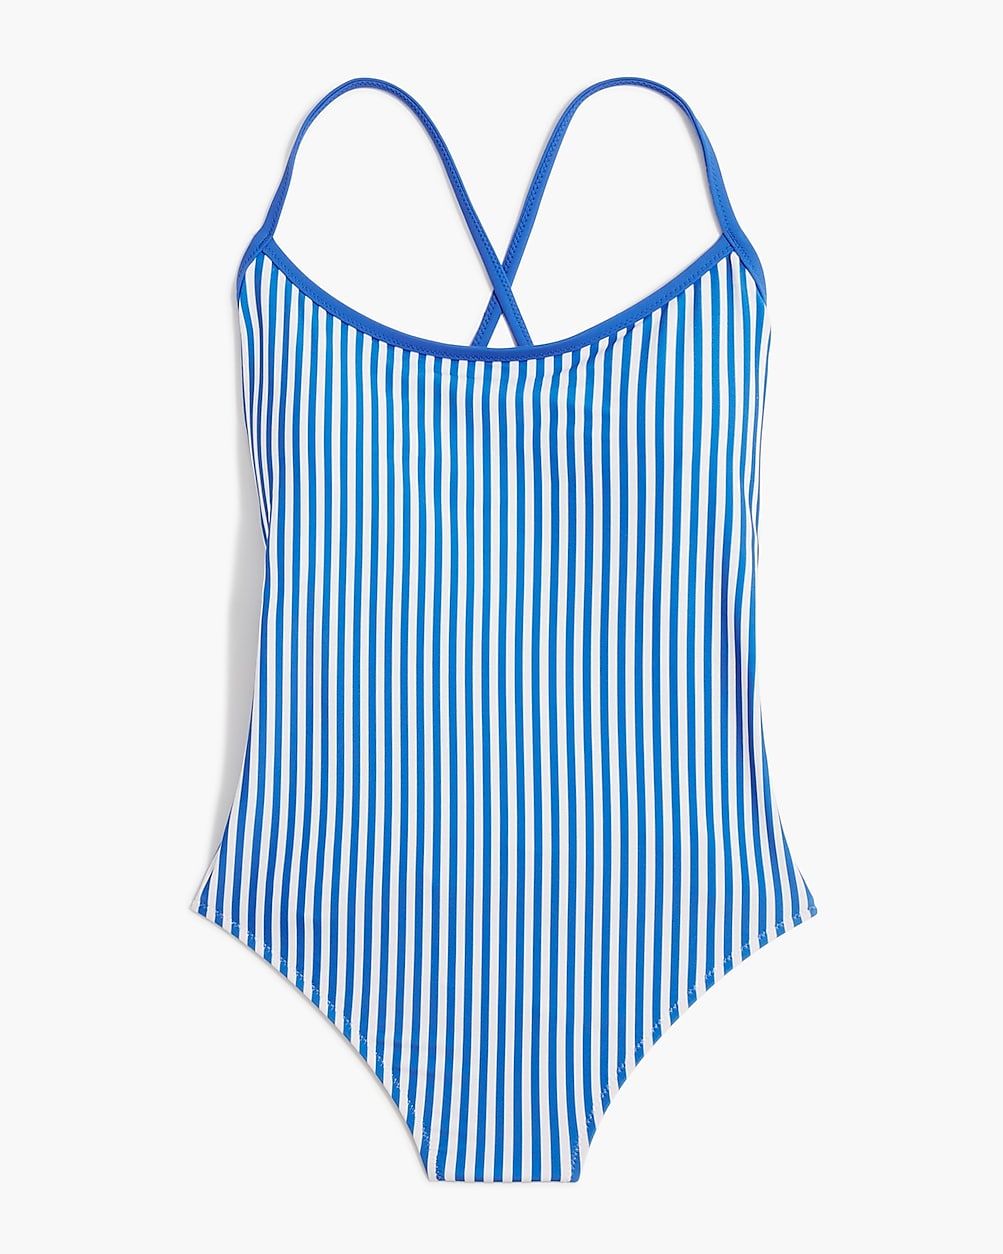 Striped one-piece swimsuit with crisscross back | J.Crew Factory